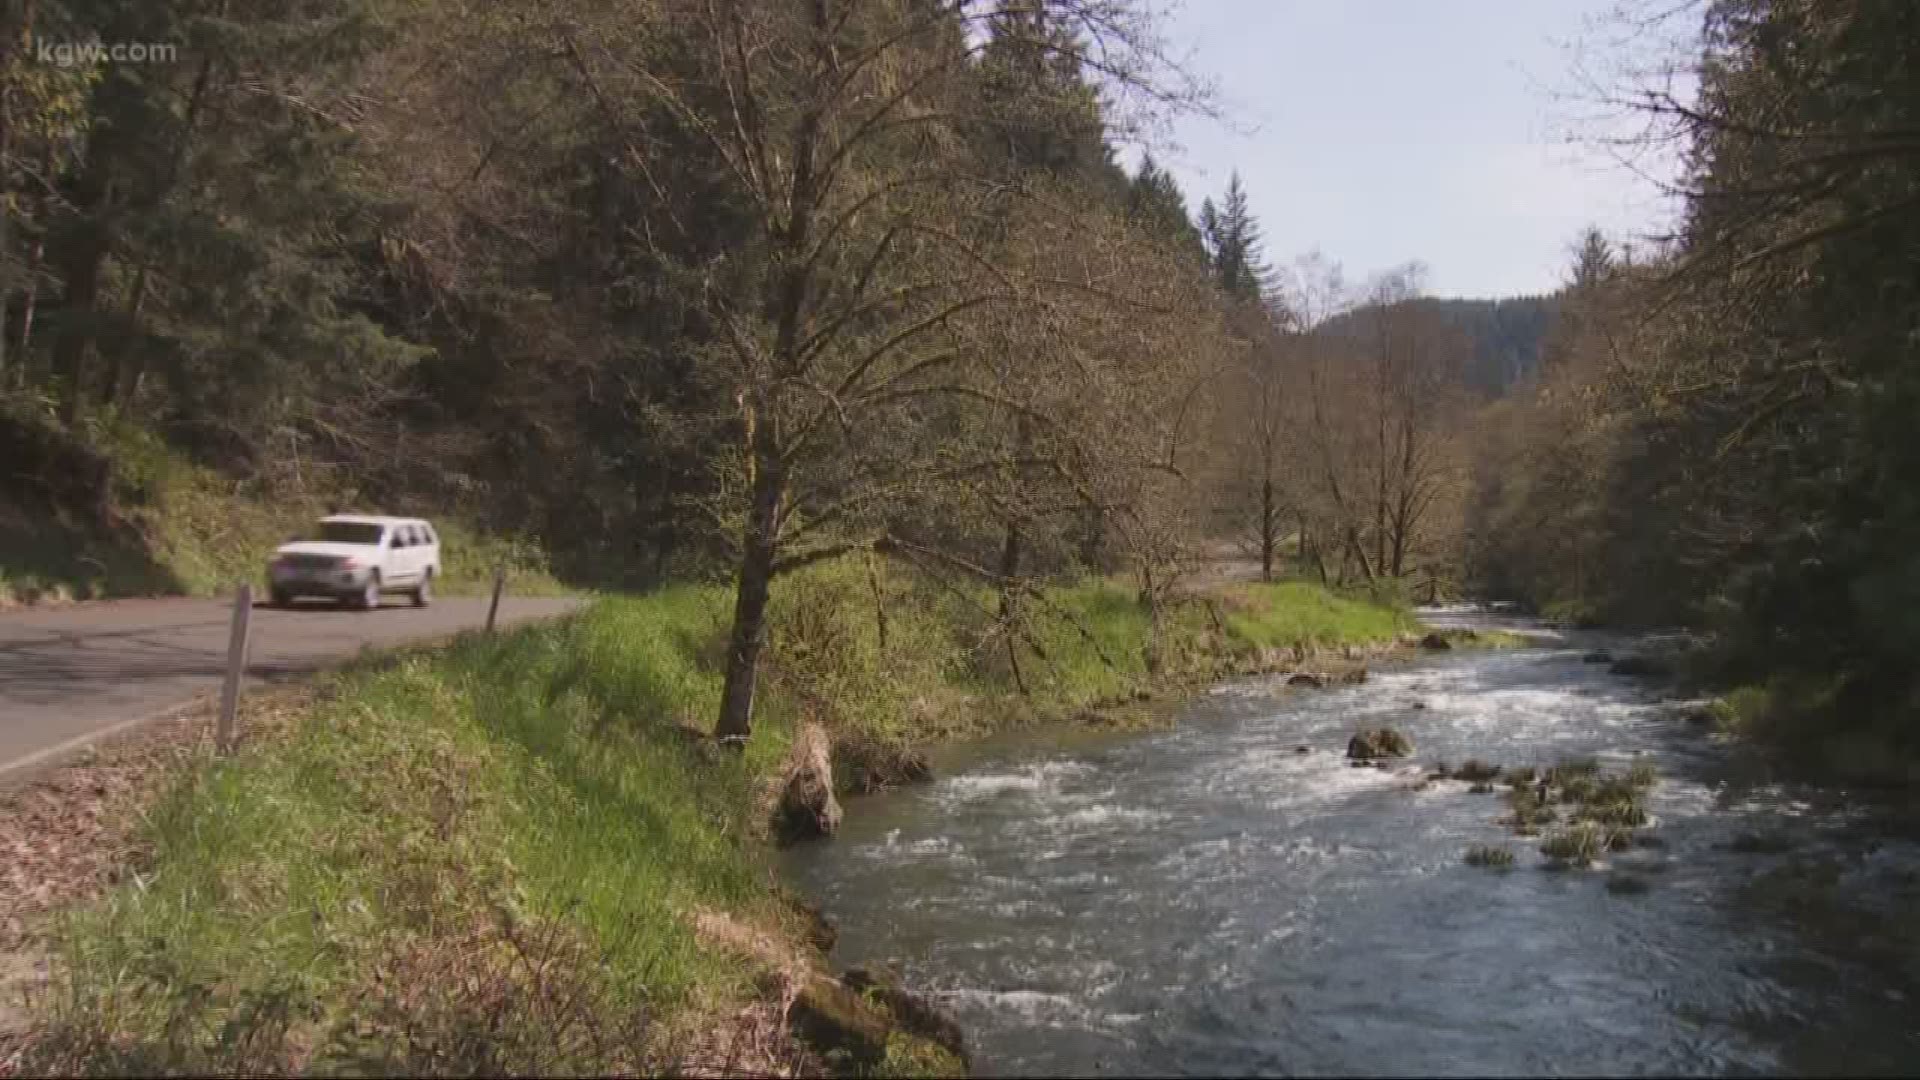 Grant McOmie shows you how to experience the Alsea River in the Coast Range.